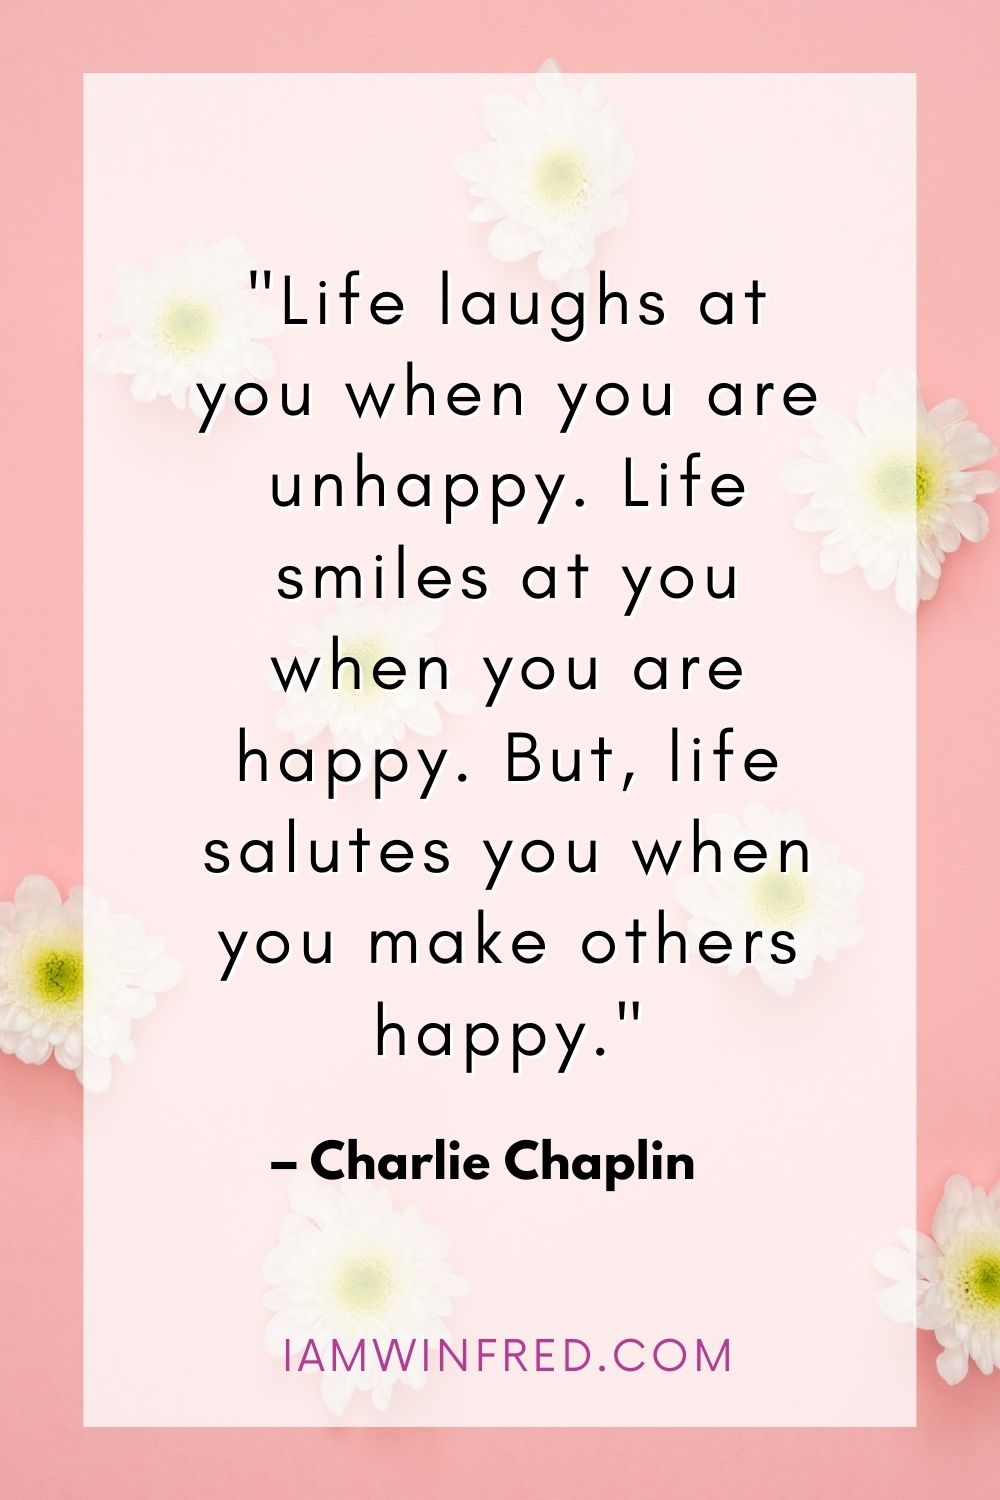 Life Laughs At You When You Are Unhappy. Life Smiles At You When You Are Happy. But Life Salutes You When You Make Others Happy.